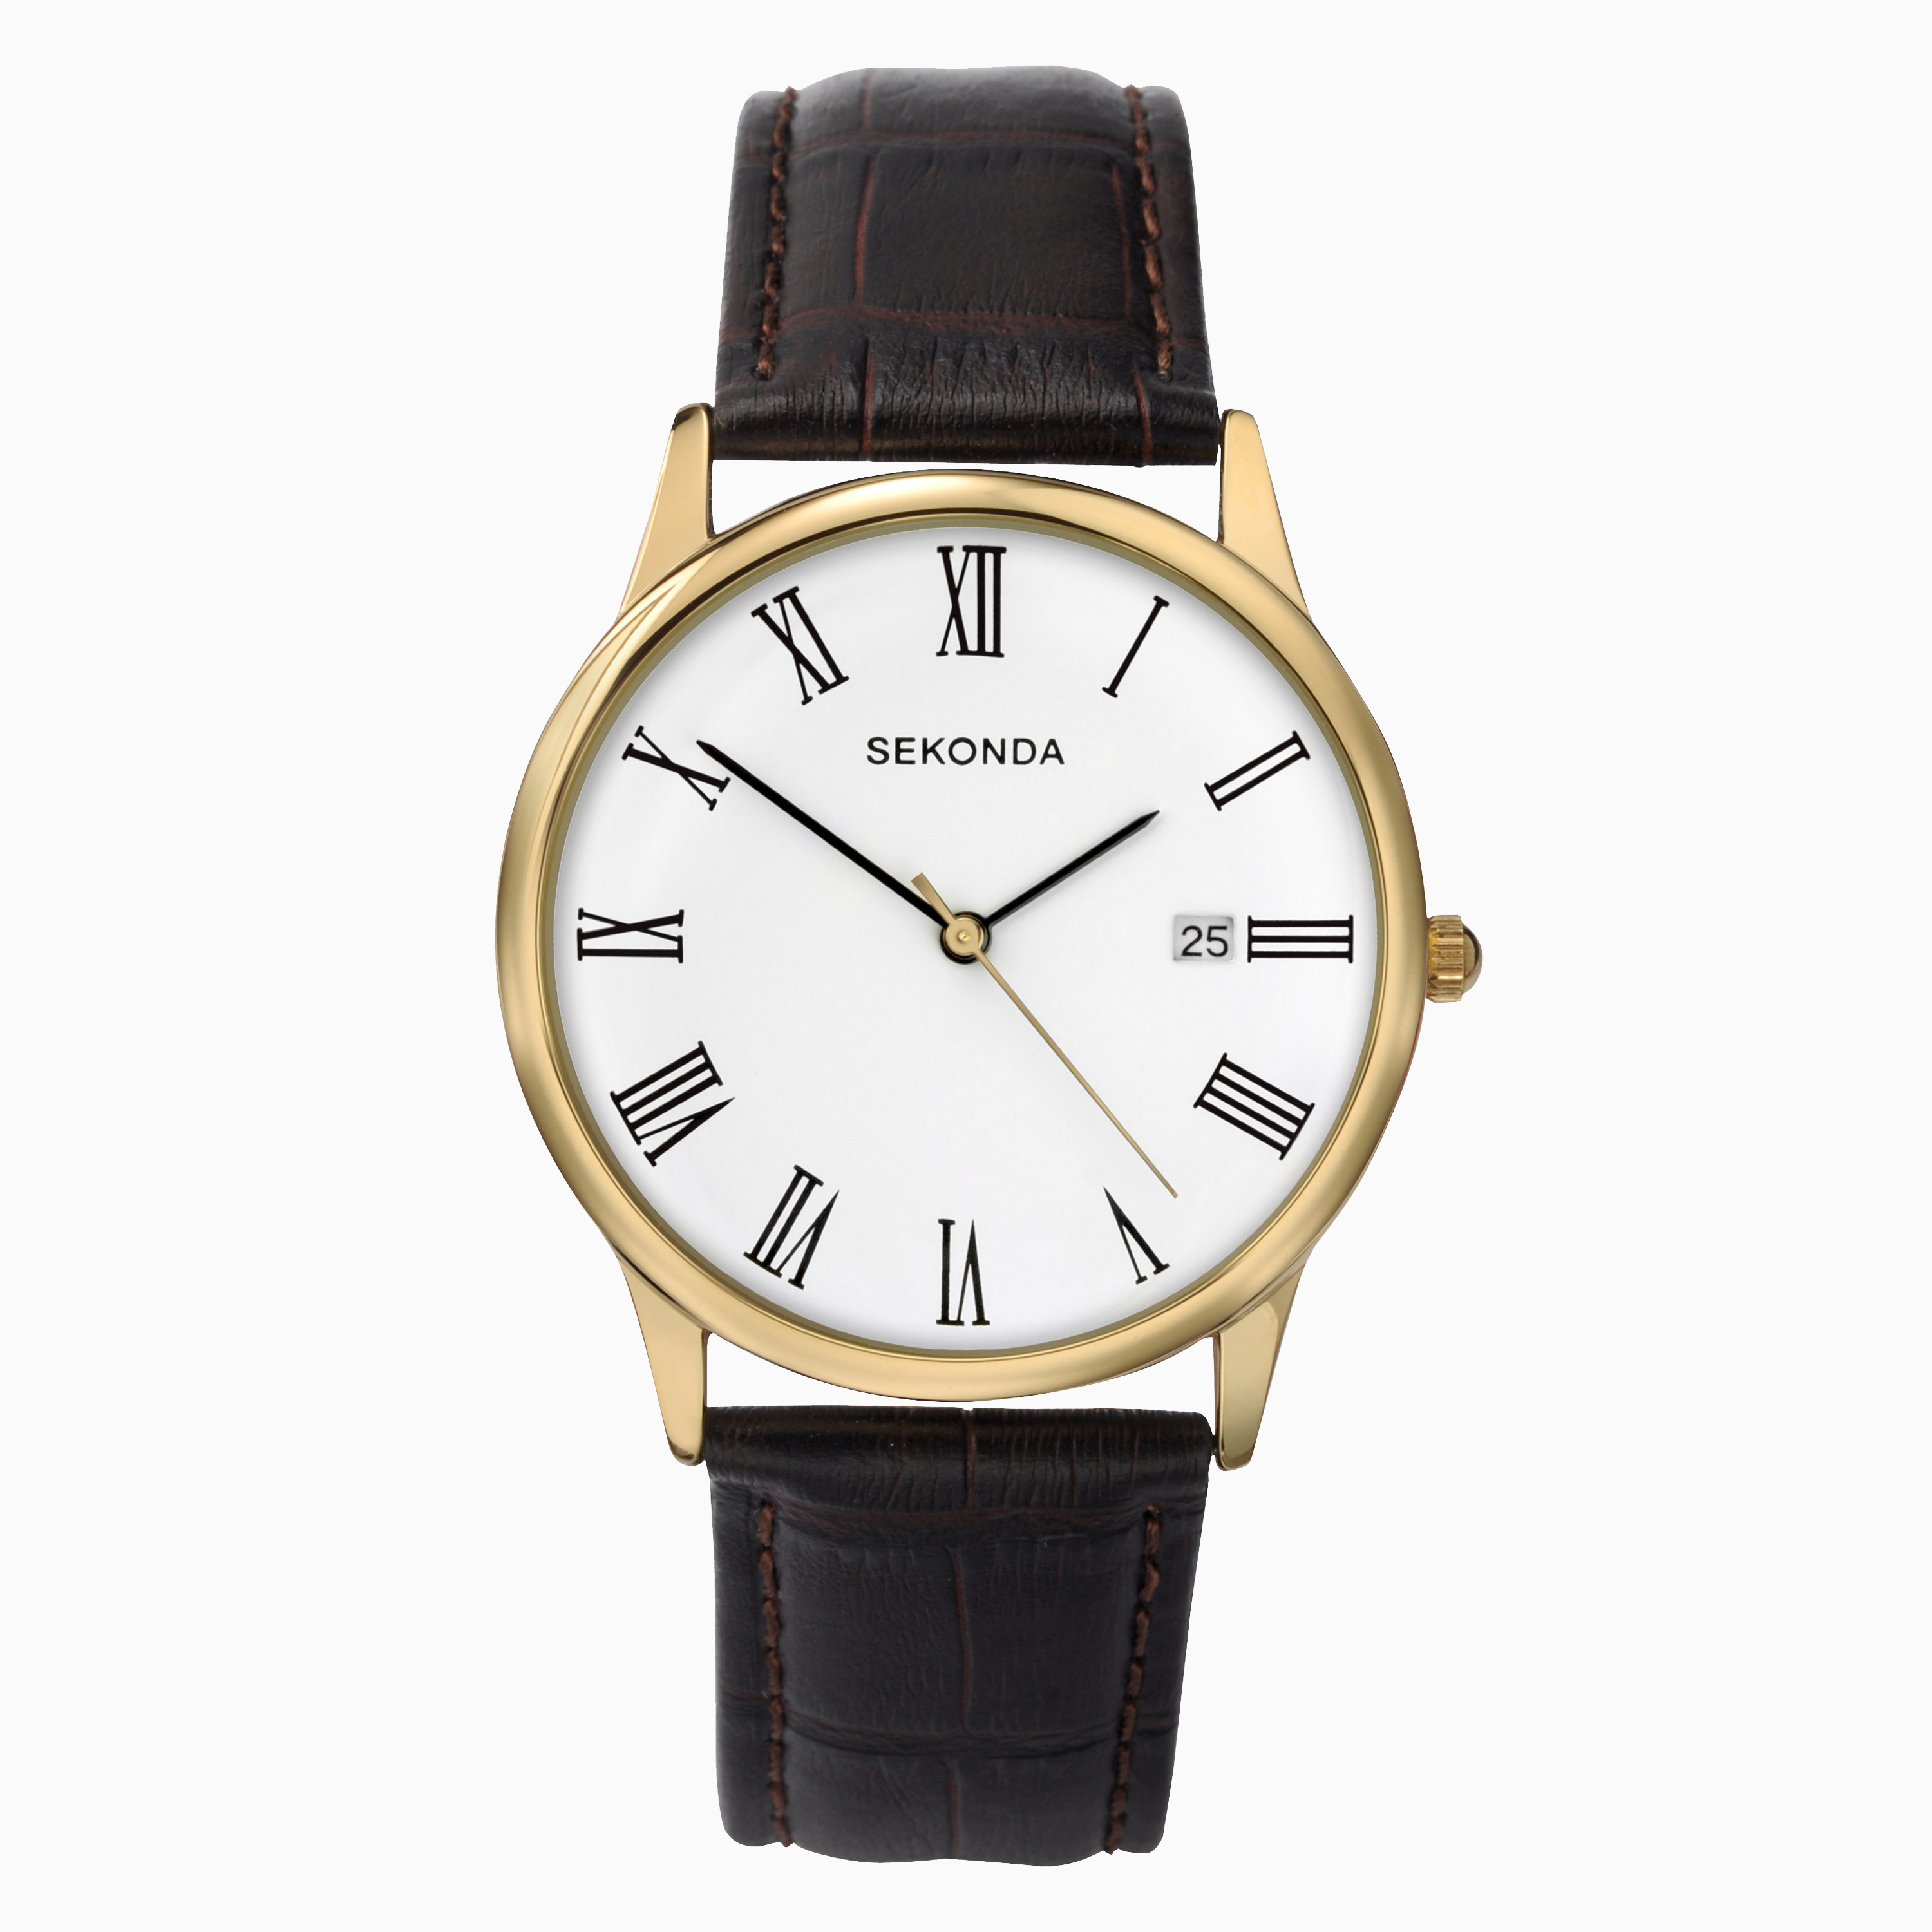 Sekonda Men's Watch | Gold Case & Leather Upper Strap with White Dial | 3676